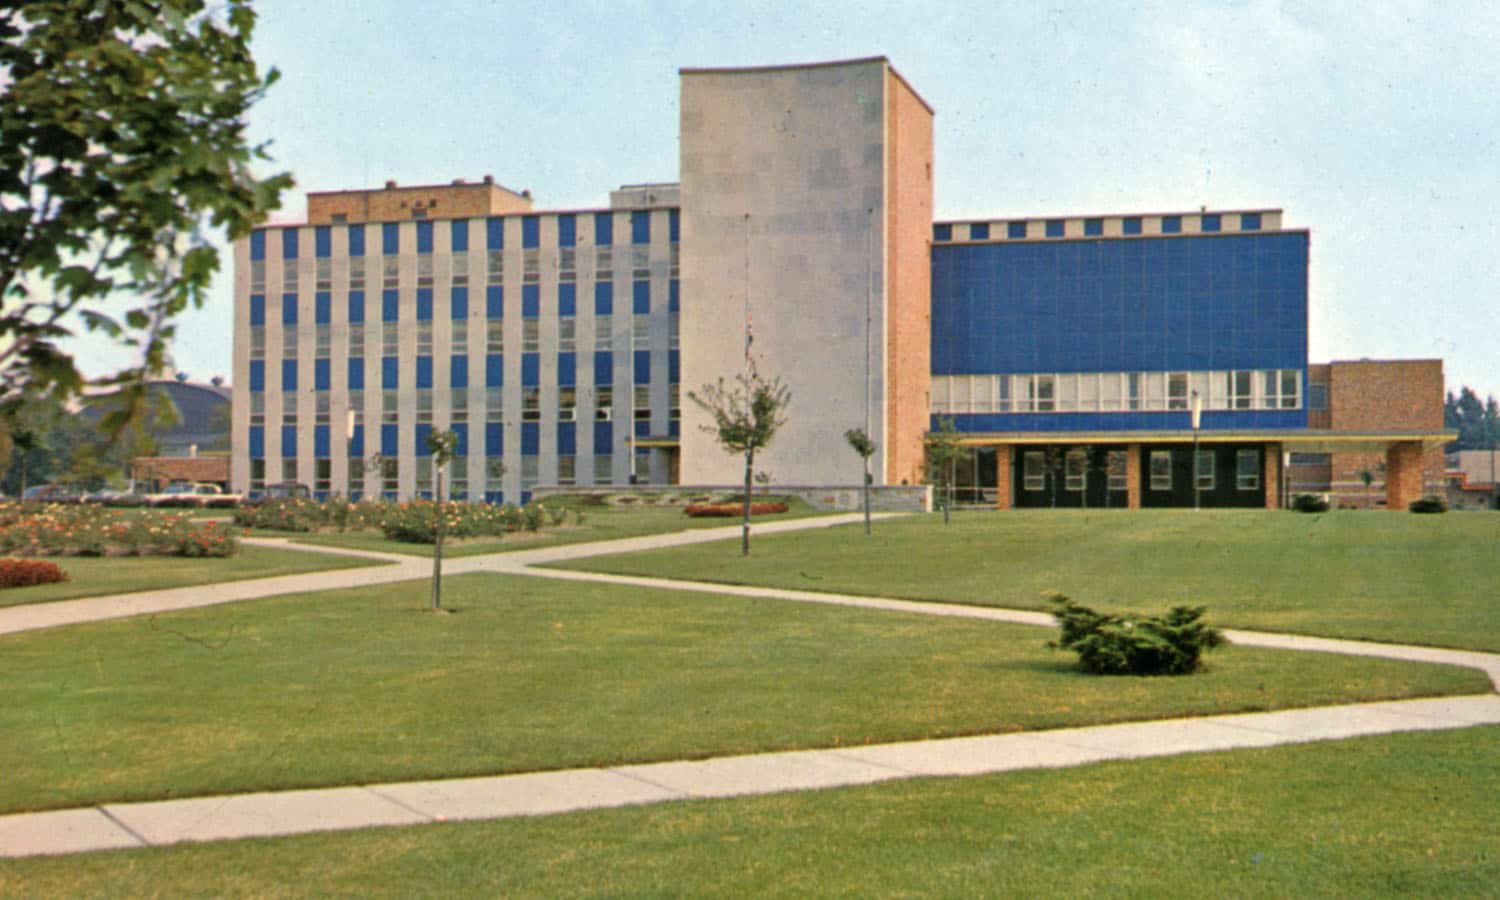 Windsor, Ontario. The modern new City Hall and beautifully landscaped surroundings (1956 - Grant-Mann Lithographers, 1956. http://swoda.uwindsor.ca/node/811)